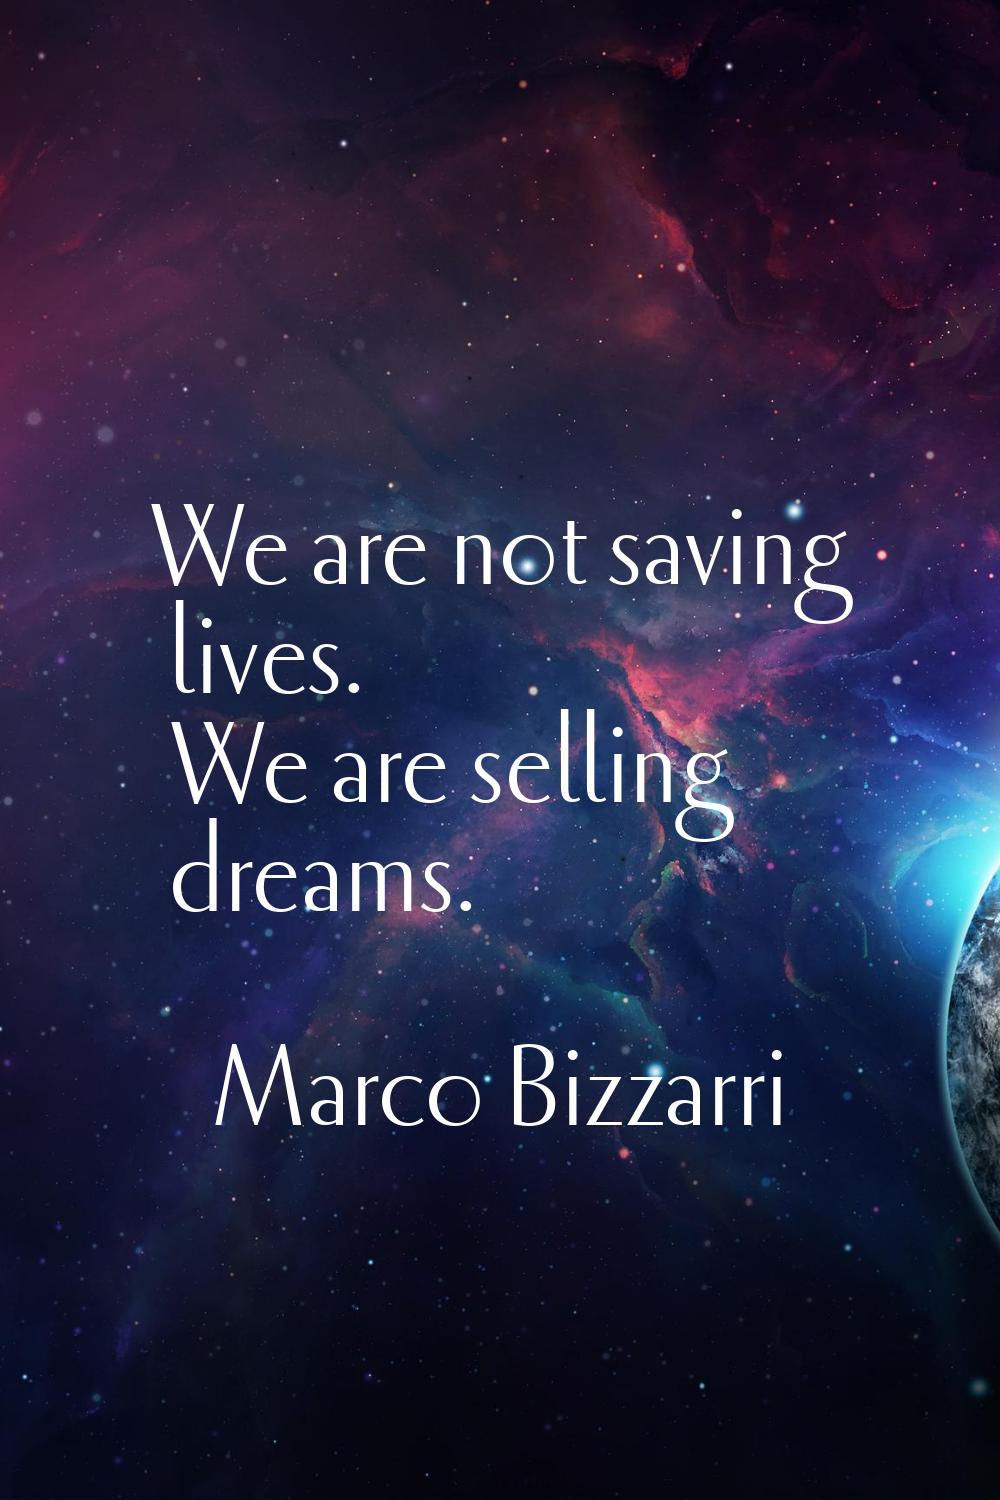 We are not saving lives. We are selling dreams.